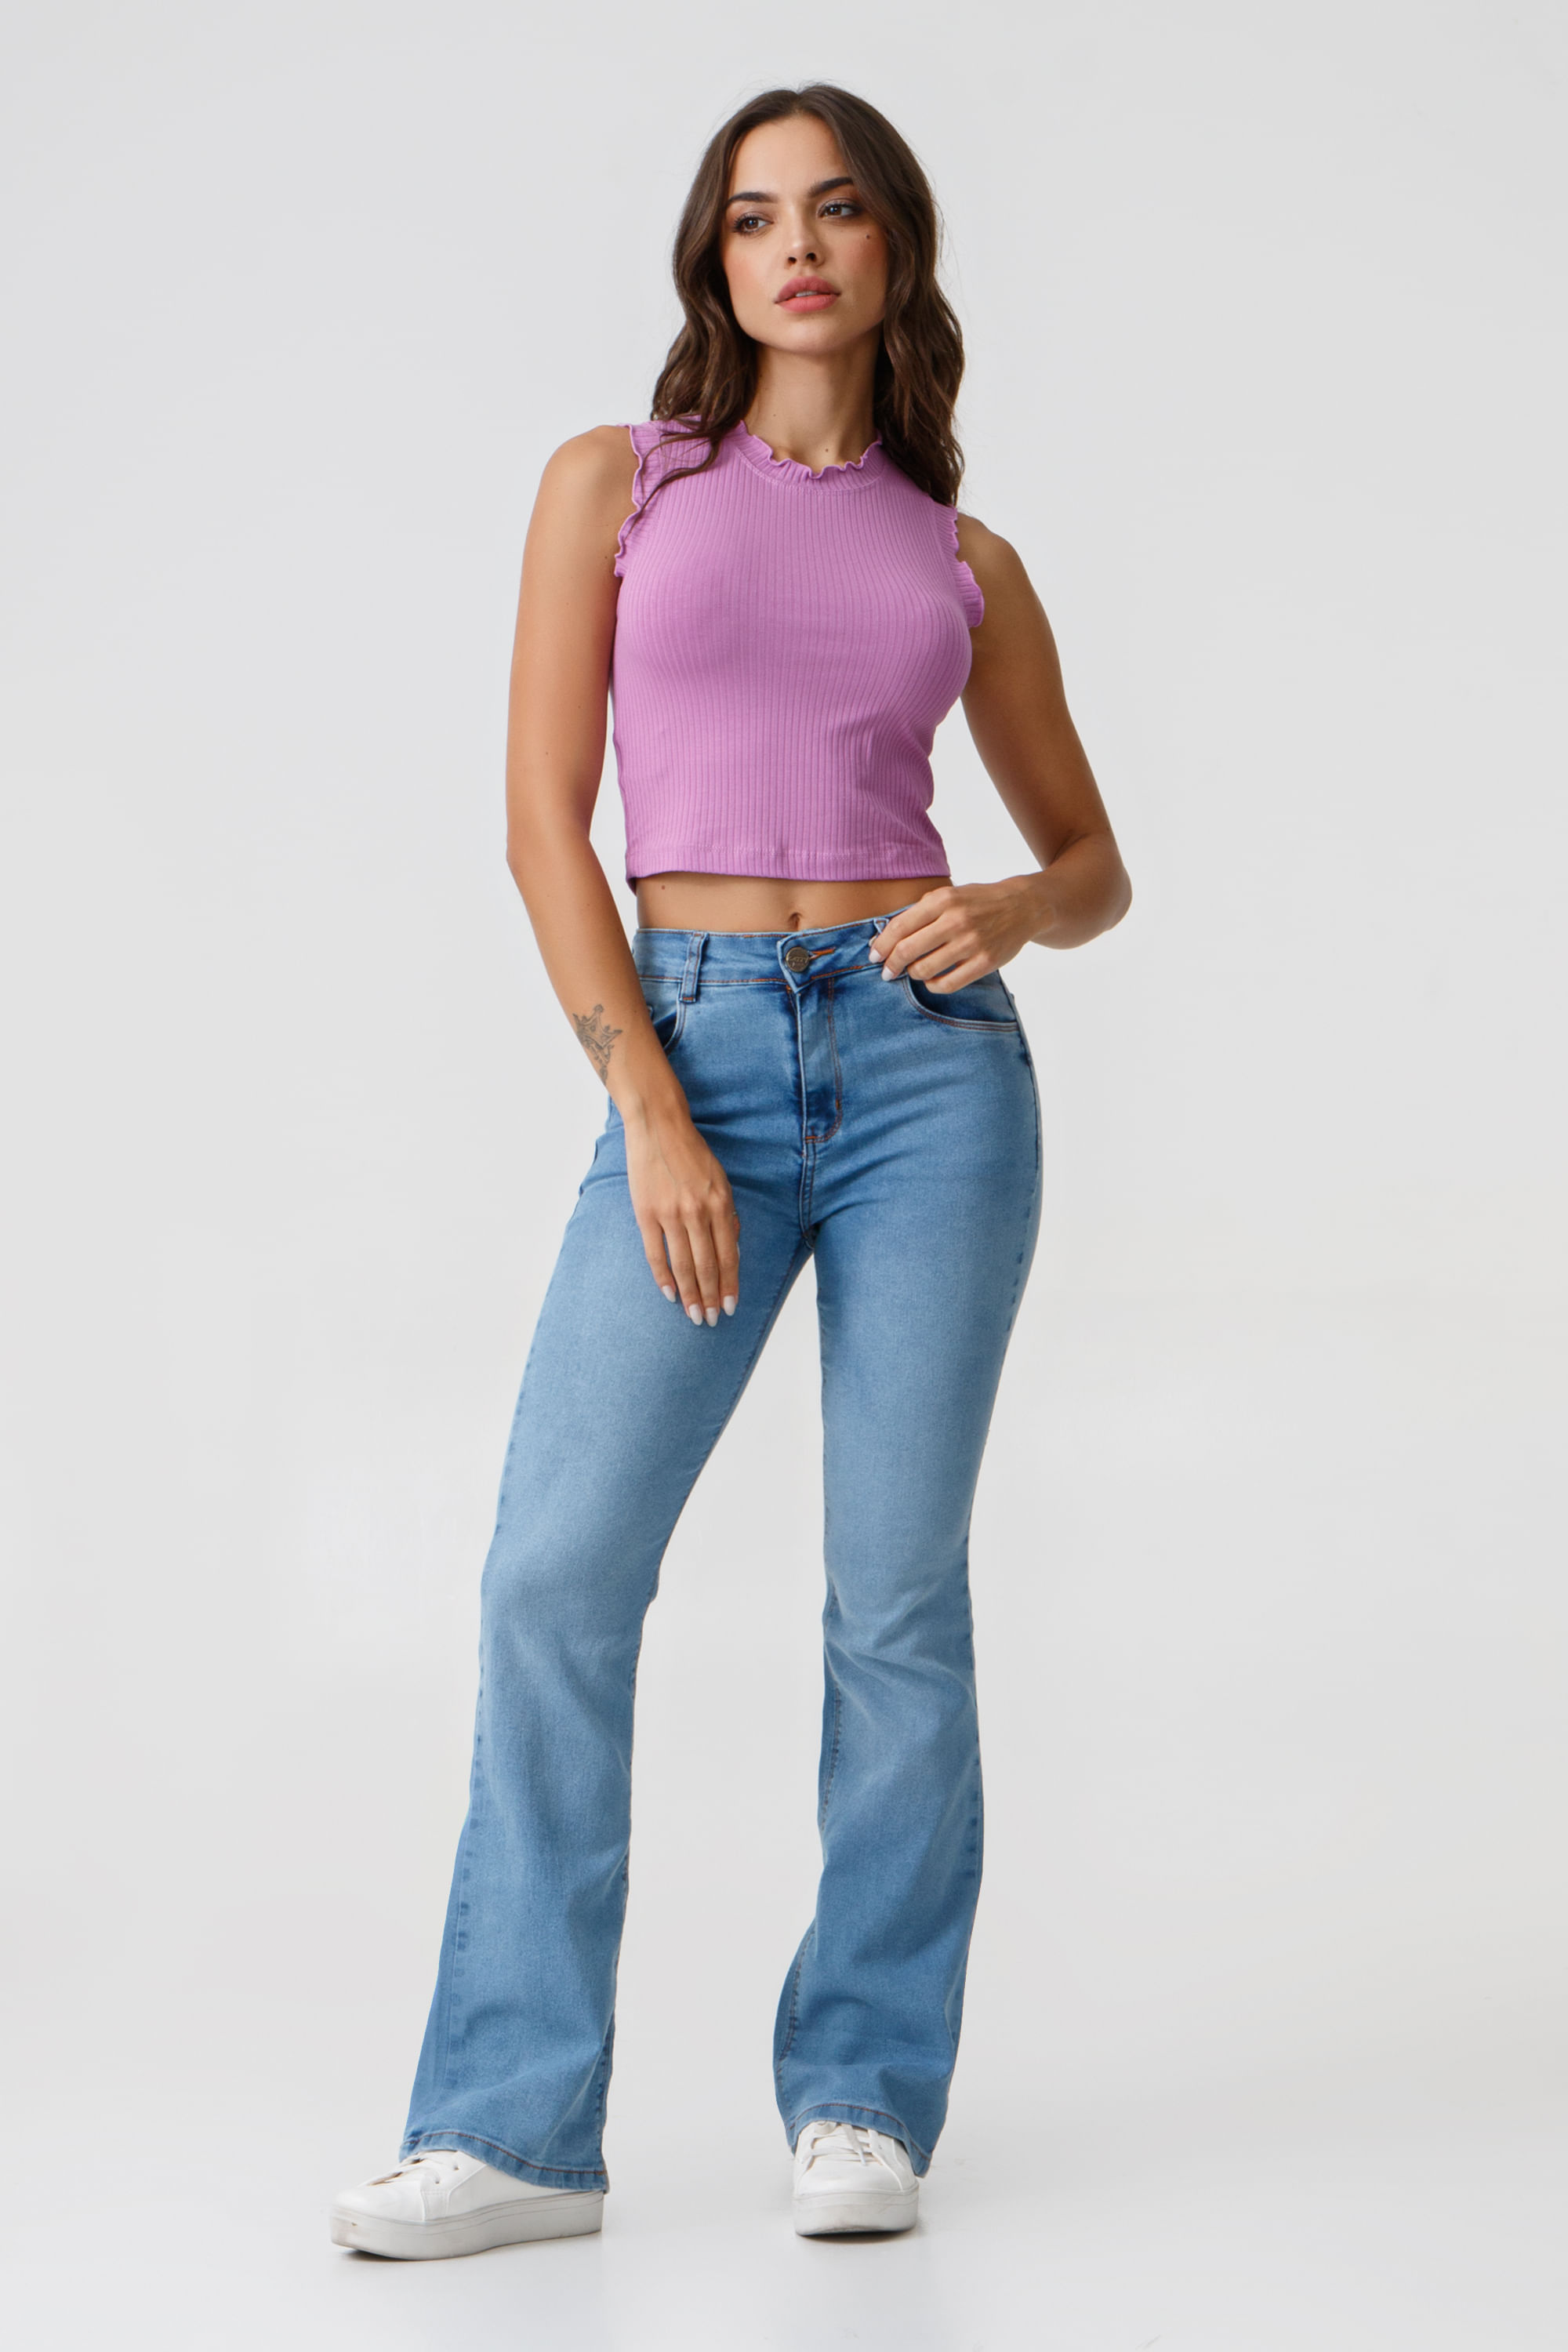 jeans-83755